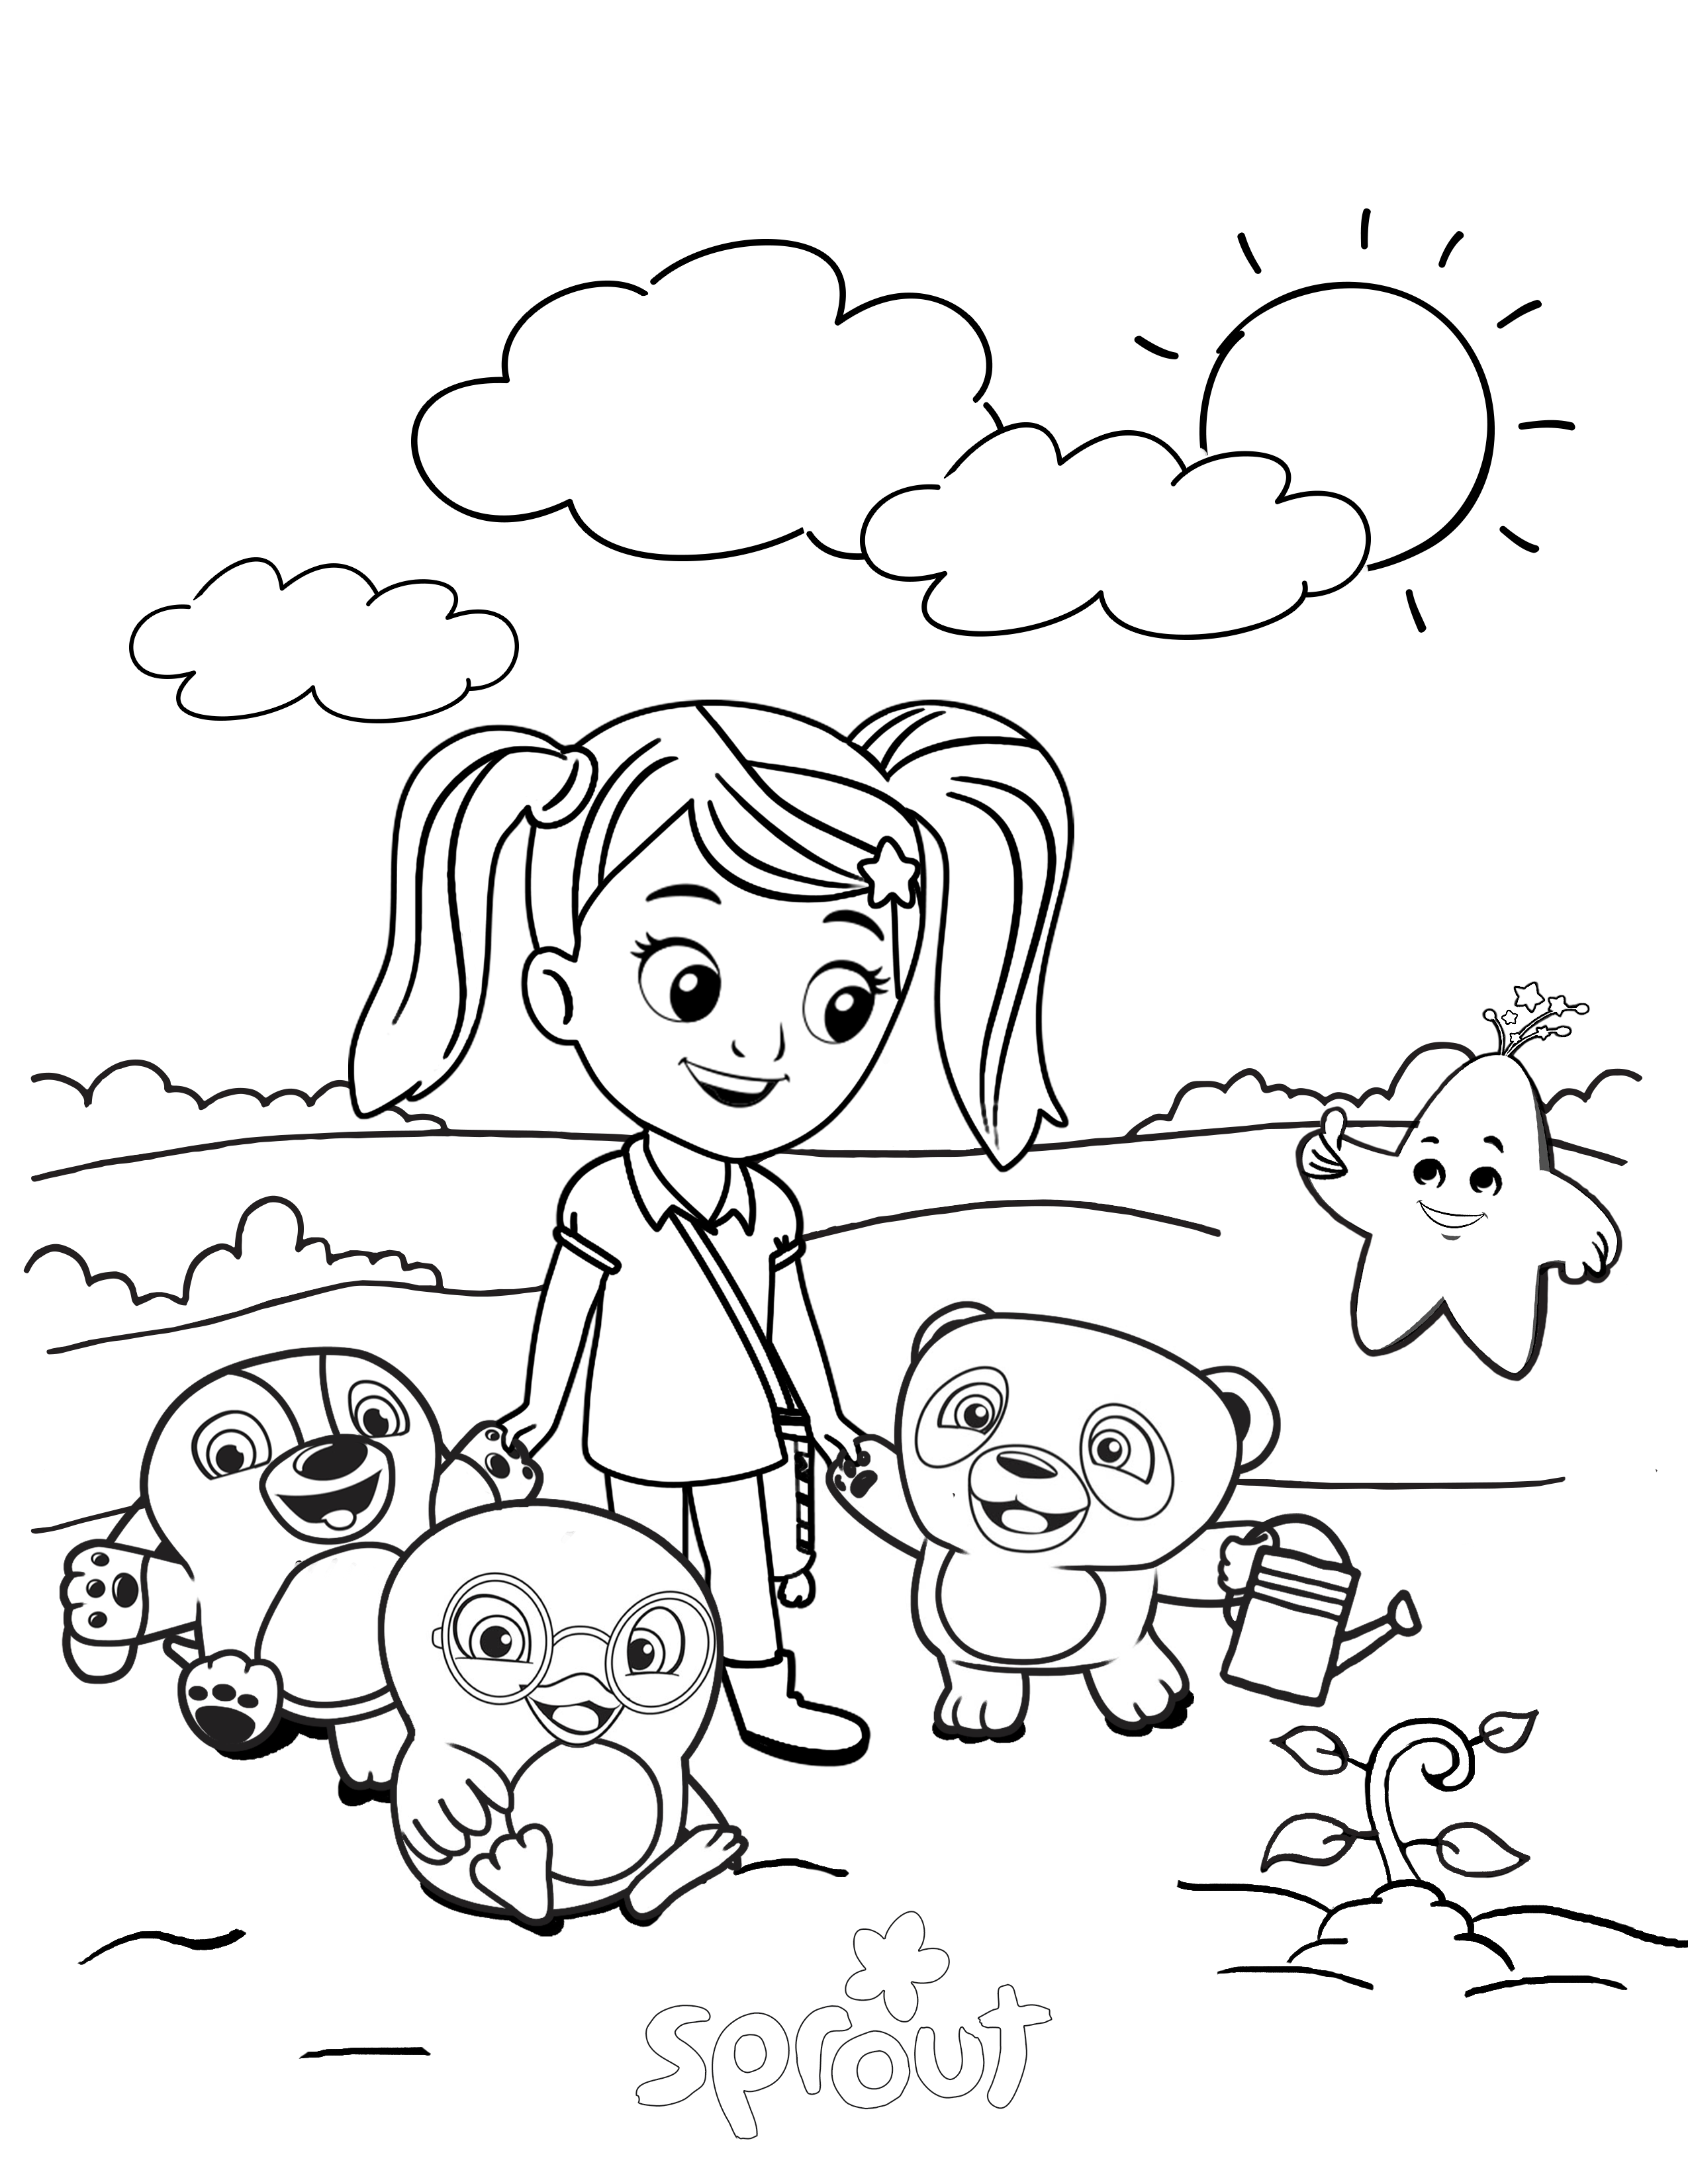 Kids Coloring Page - Ruff-Ruff, Tweet and Dave | Sprout